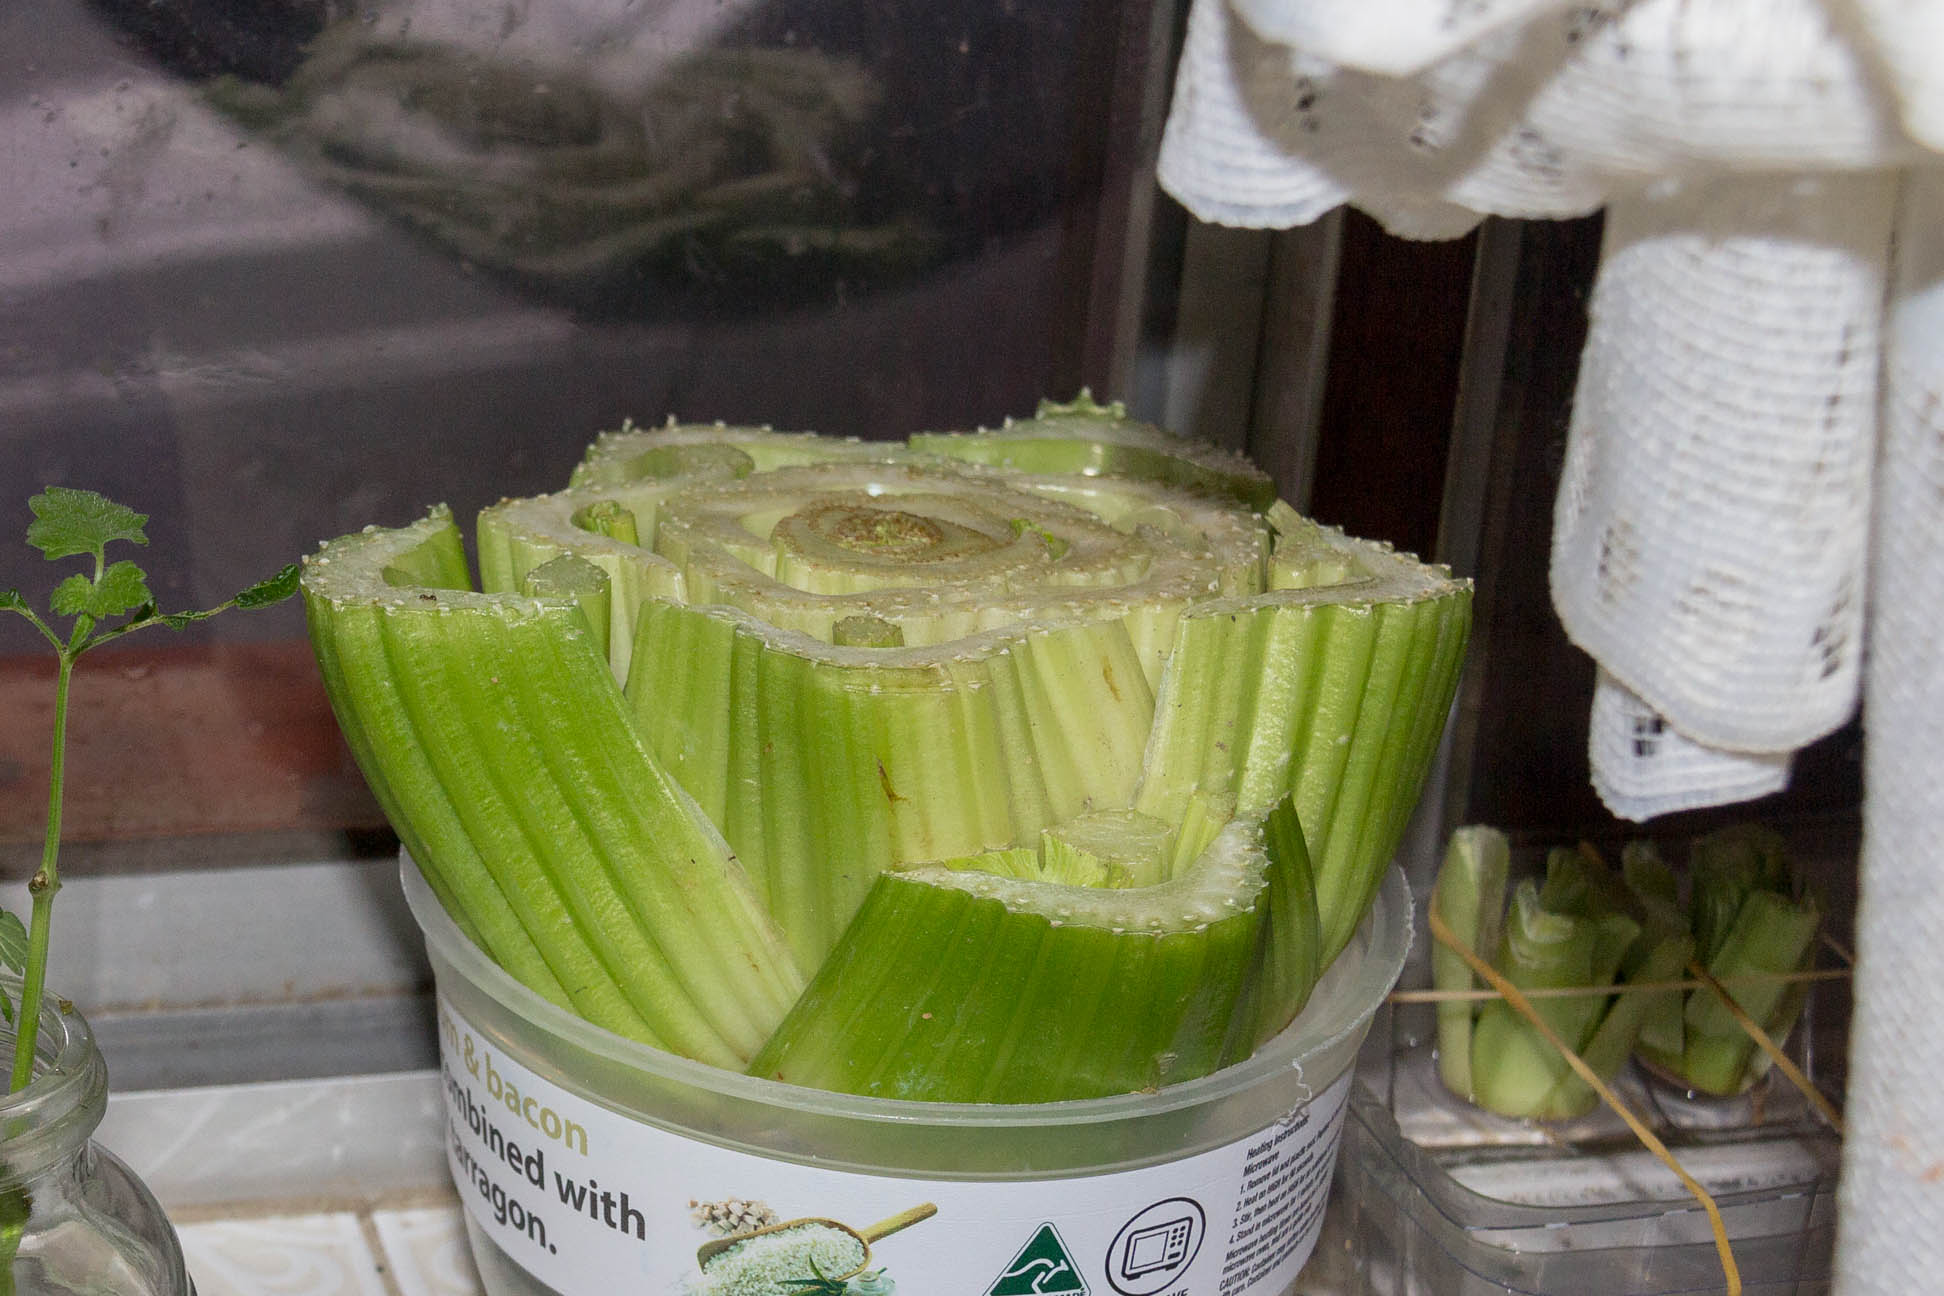 bottom half of celery suspended in a plastic container